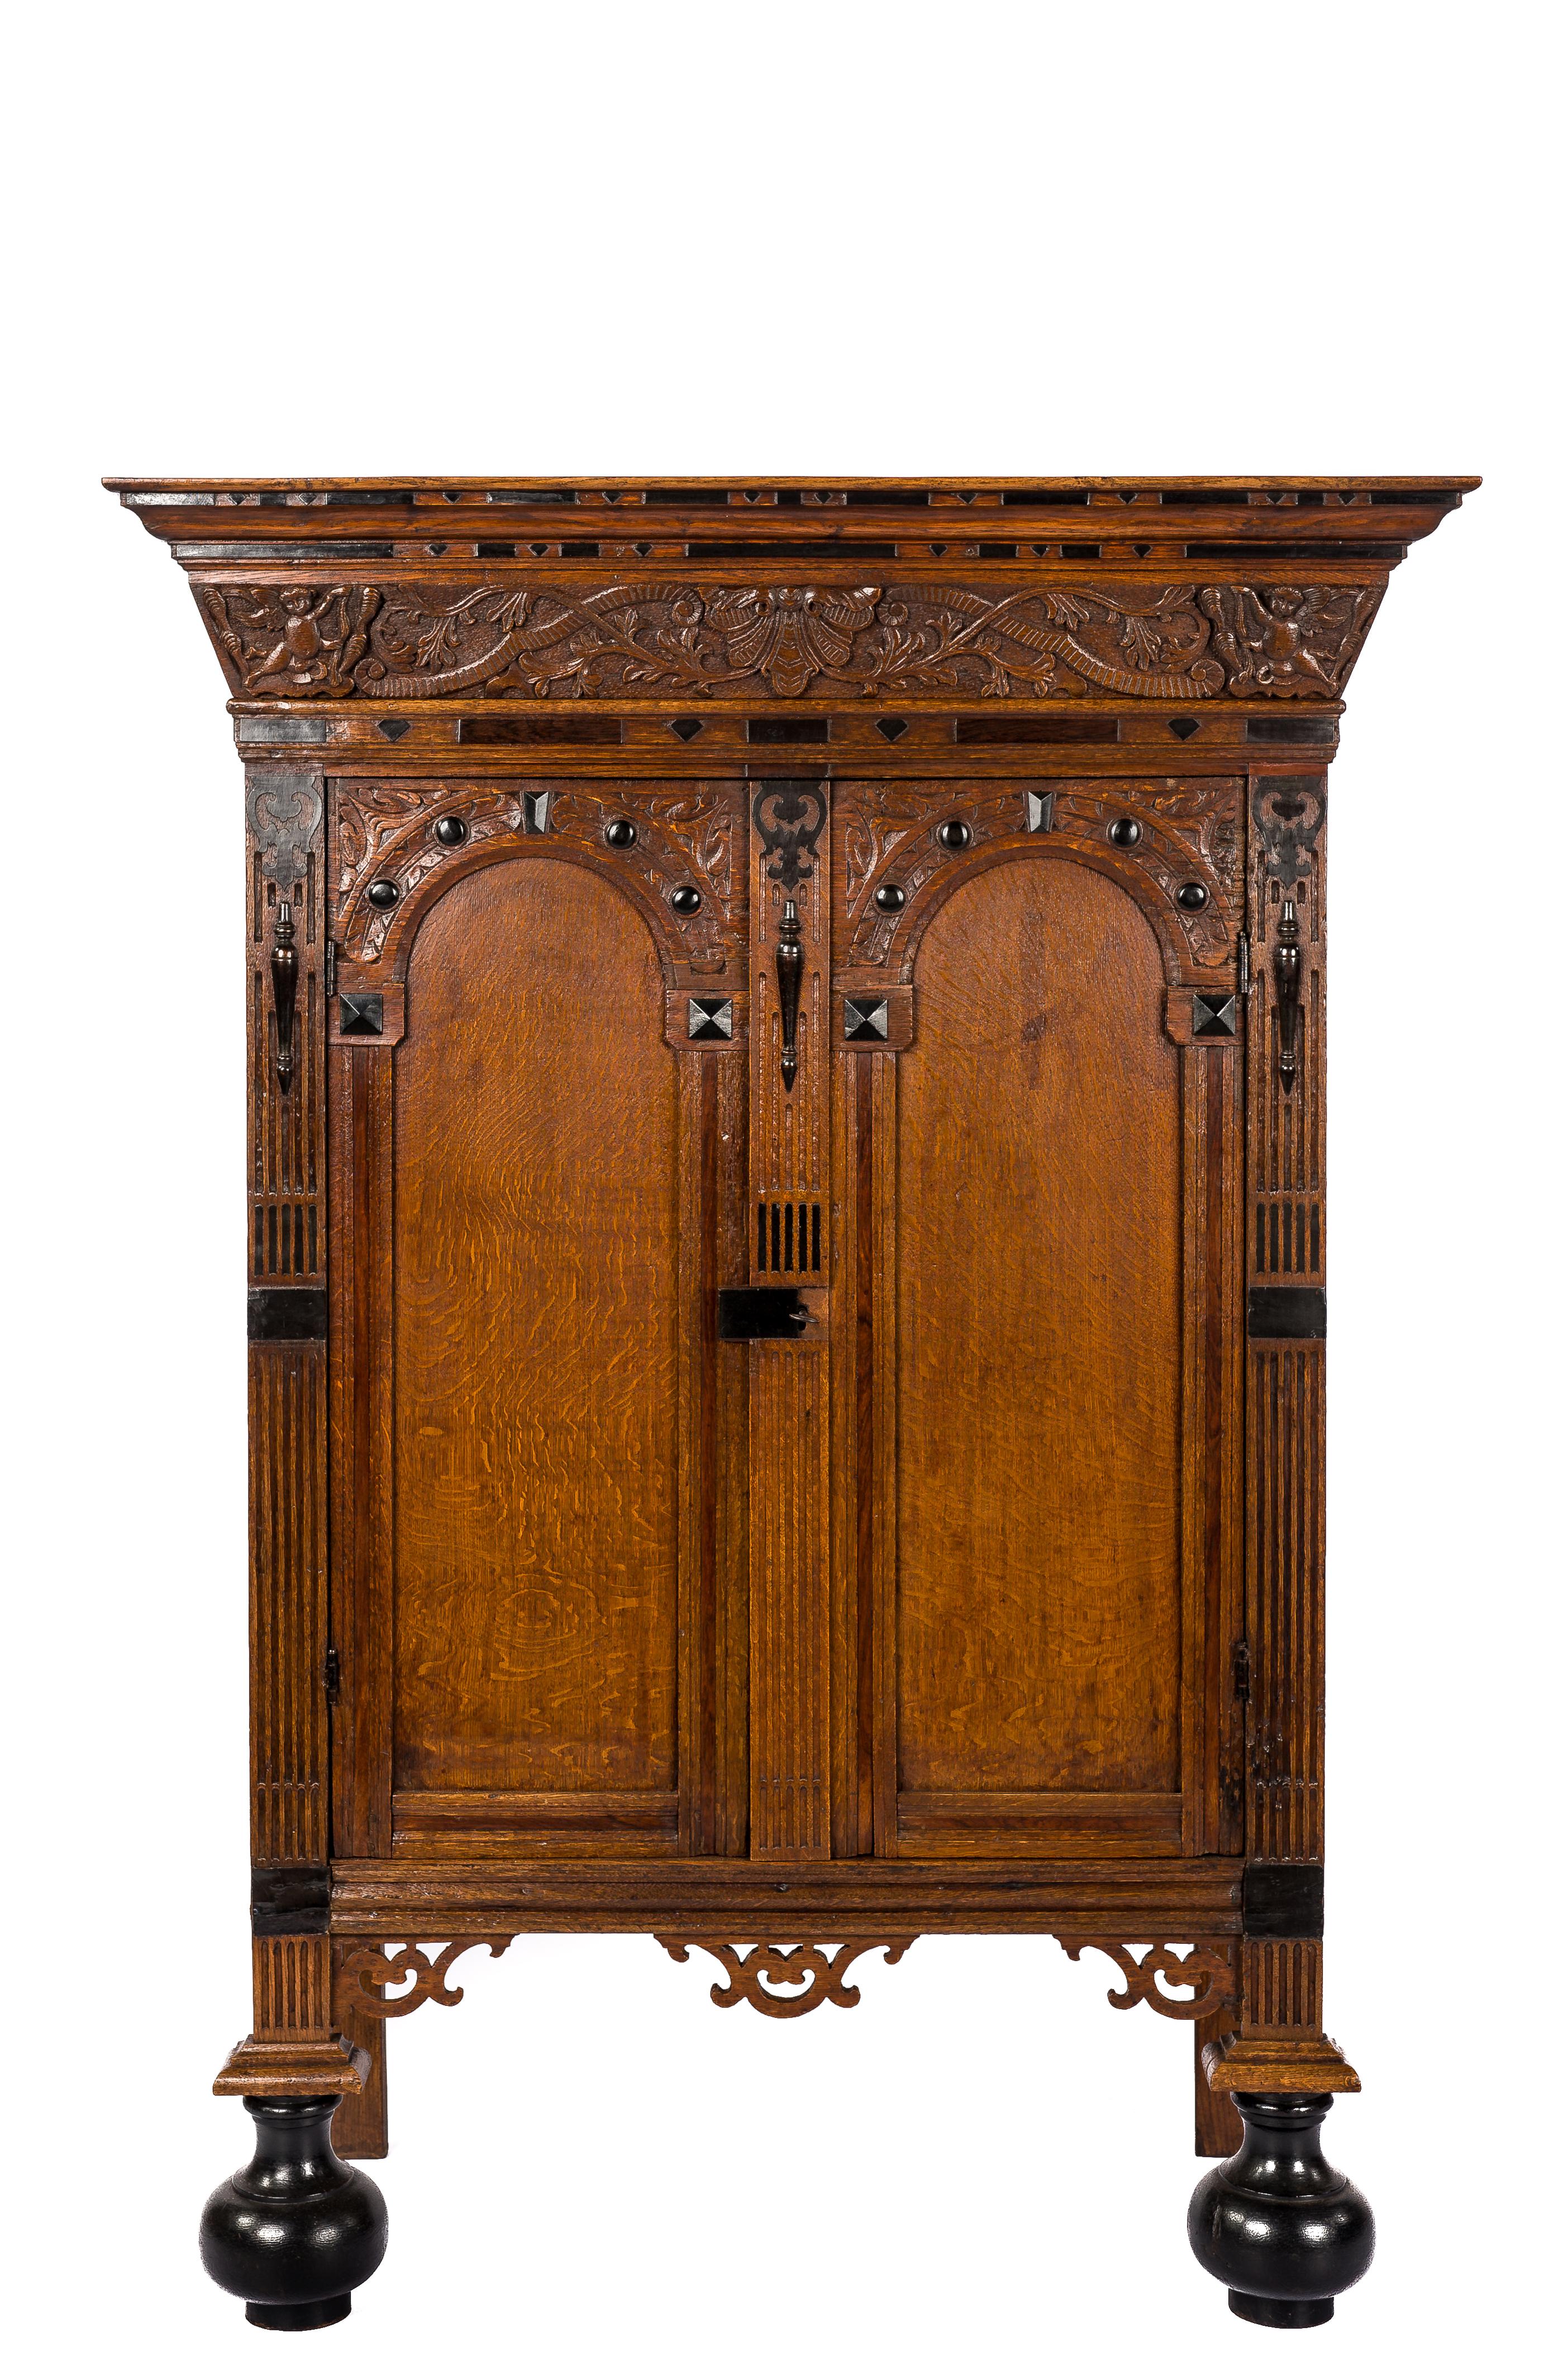 Antique 17th Century Dutch oak and ebony two-door Renaissance cabinet.

This extraordinary cupboard is made of the finest quarter-sawn oak in the tradition of the Dutch Renaissance during the “Dutch golden age” It is a relatively small two-door